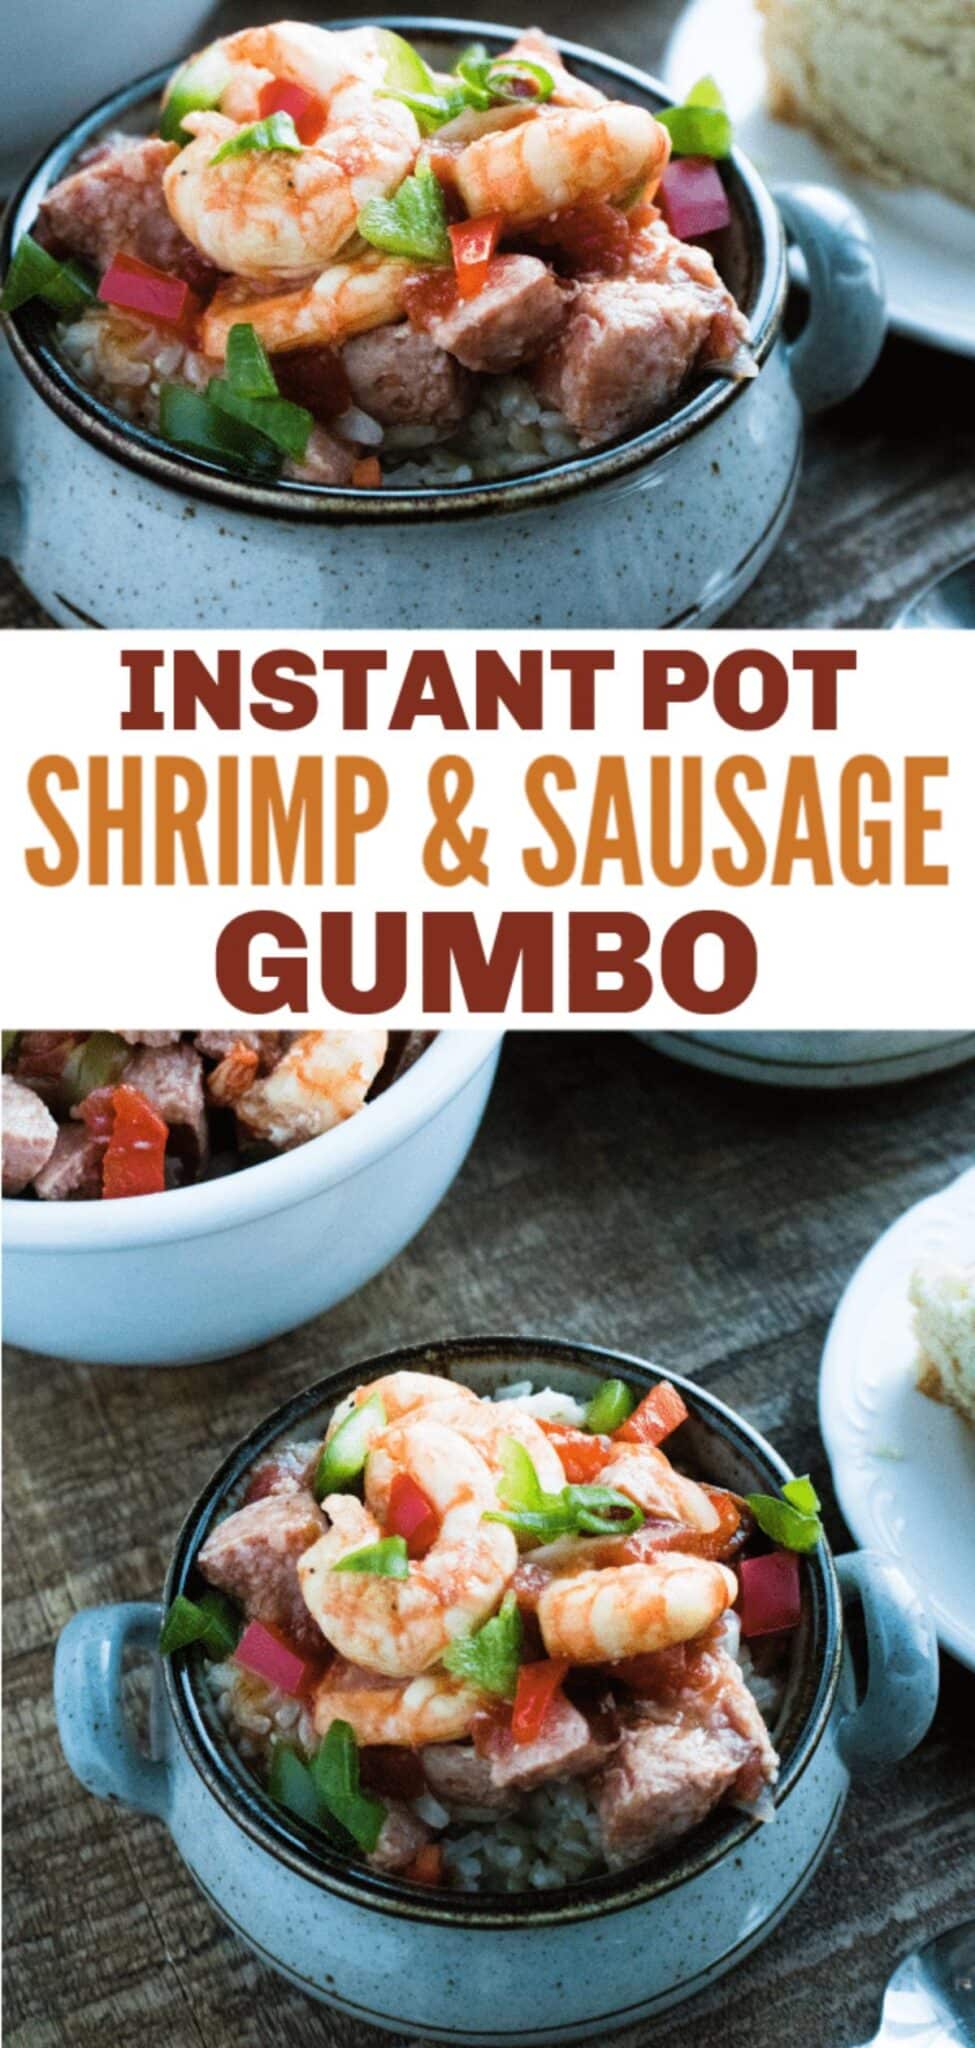 a collage of bowls filled with sausage & shrimp gumbo on a table with an instant pot in the background with title text reading Instant Pot Shrimp & Sausage Gumbo.